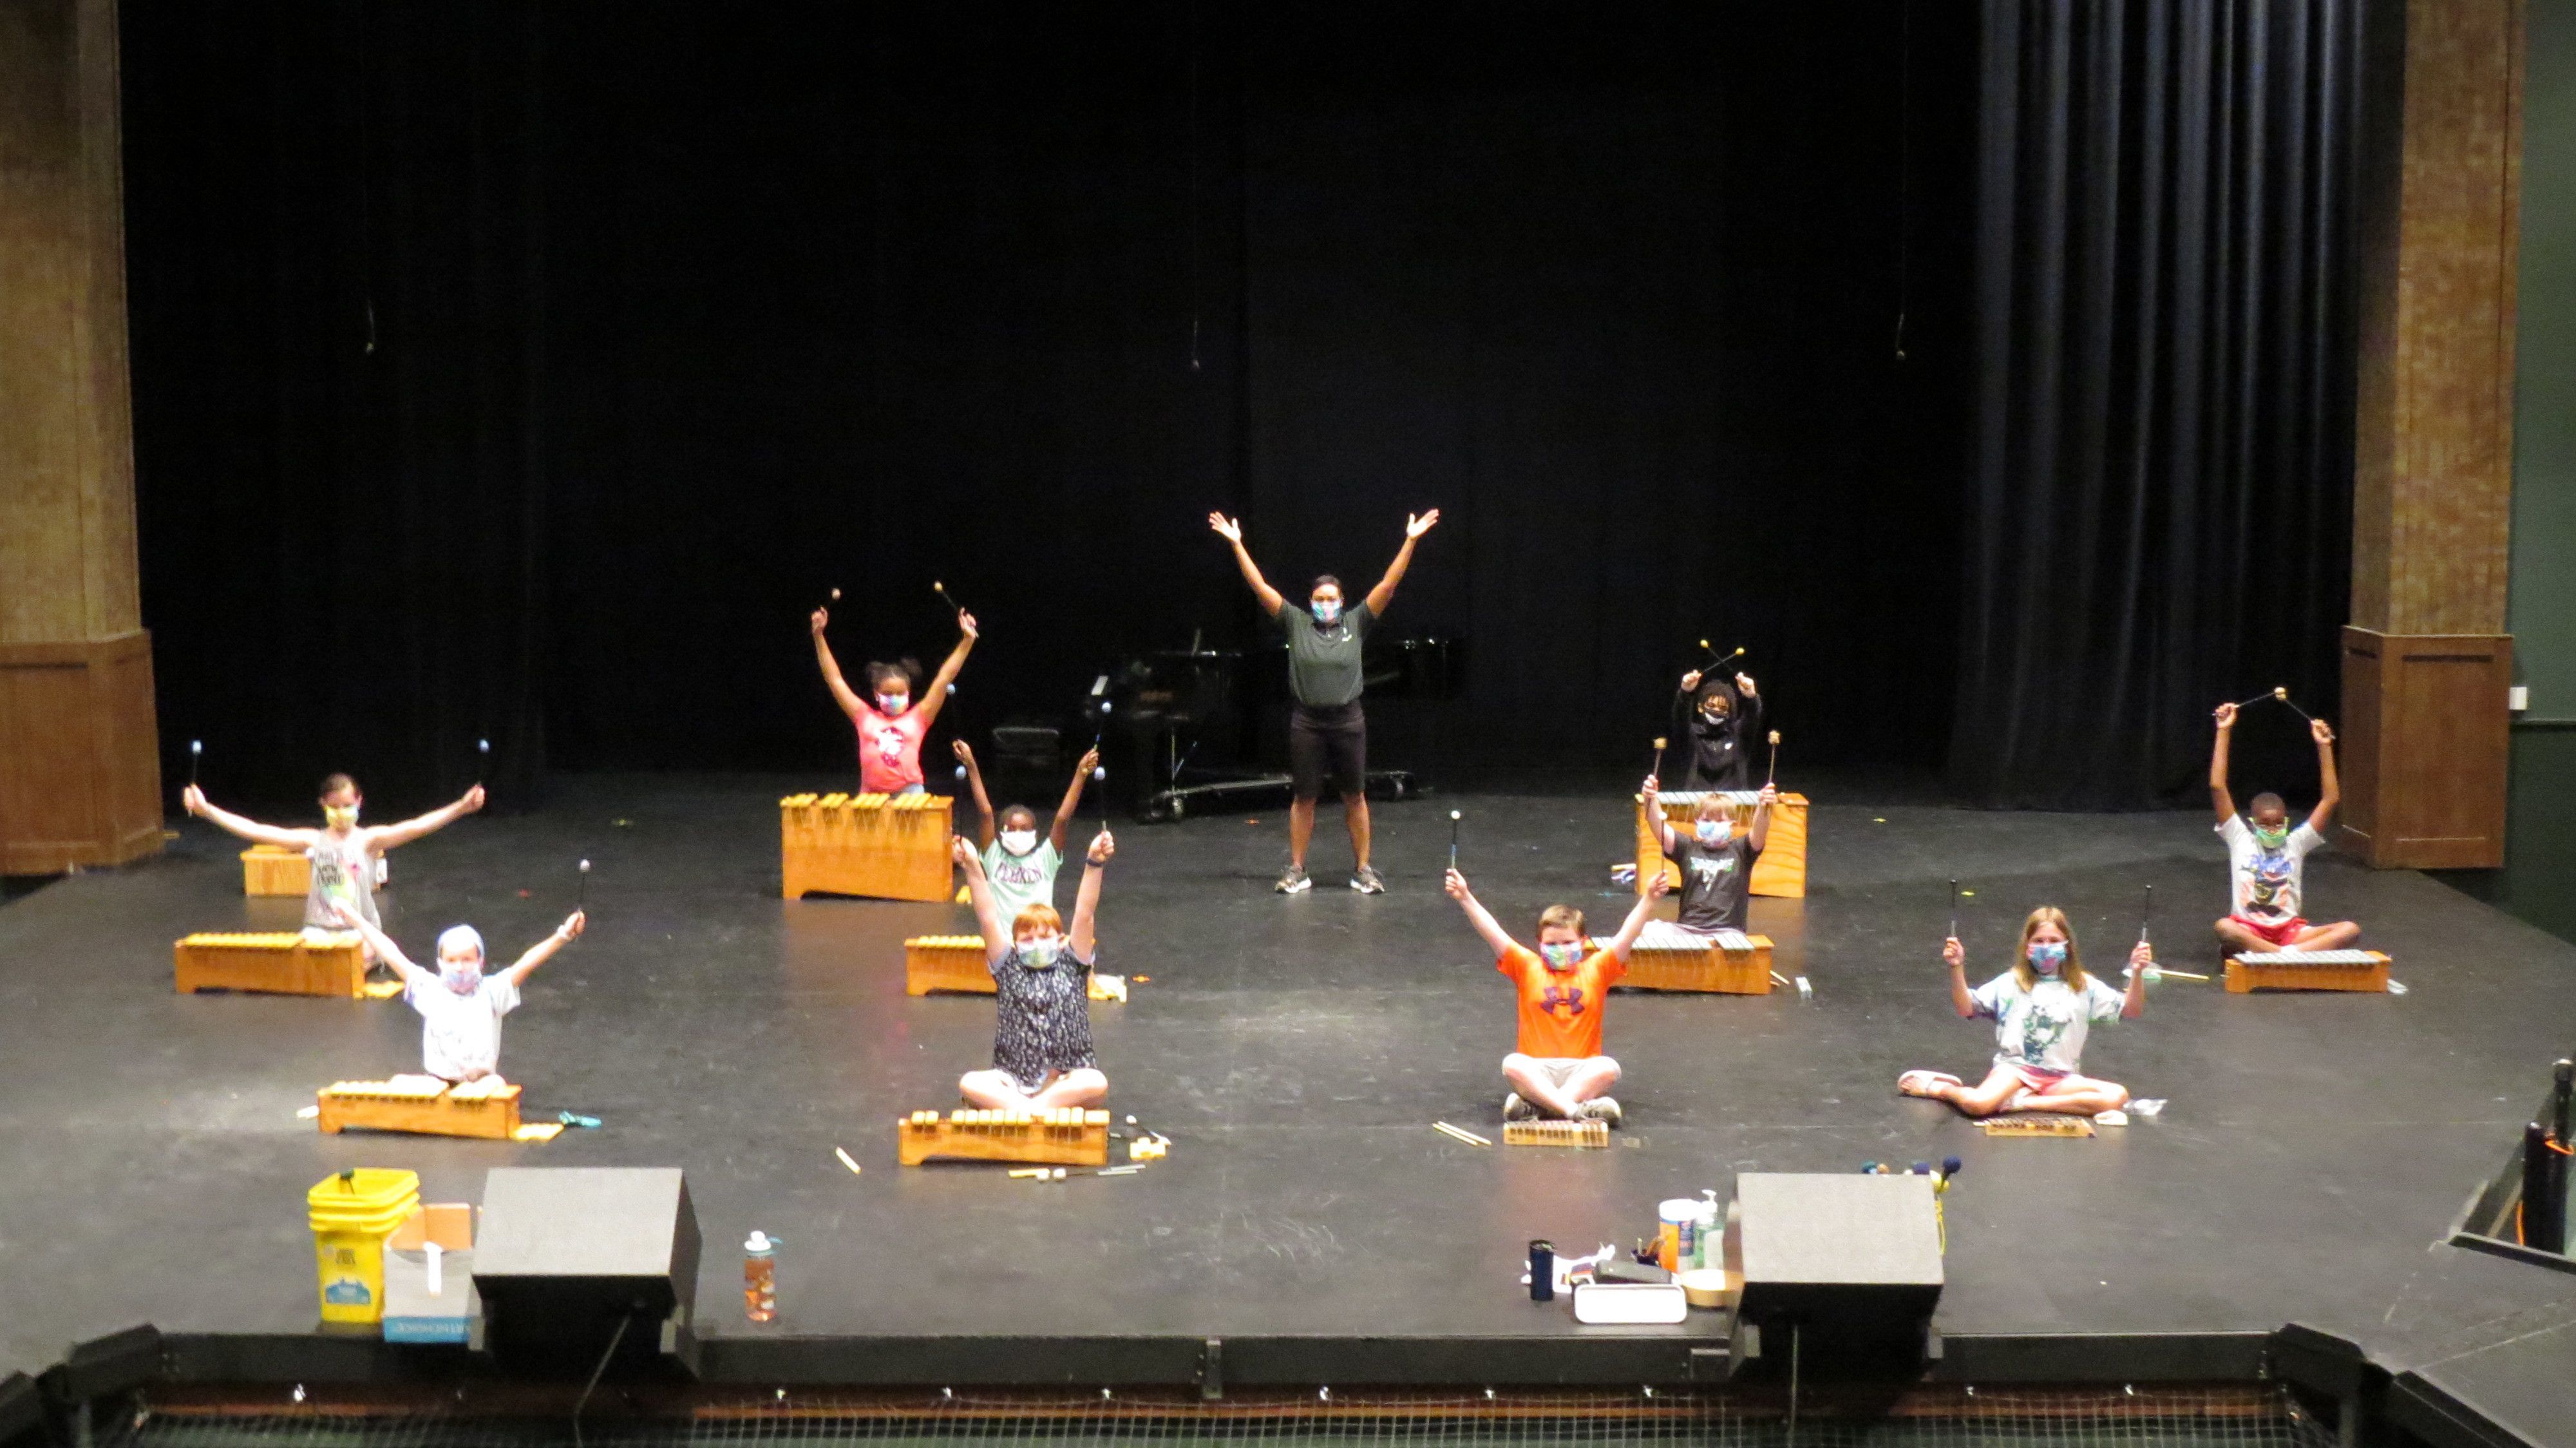 A socially distanced group of elementary aged students and their instructors pose on a large stage with their orff instruments